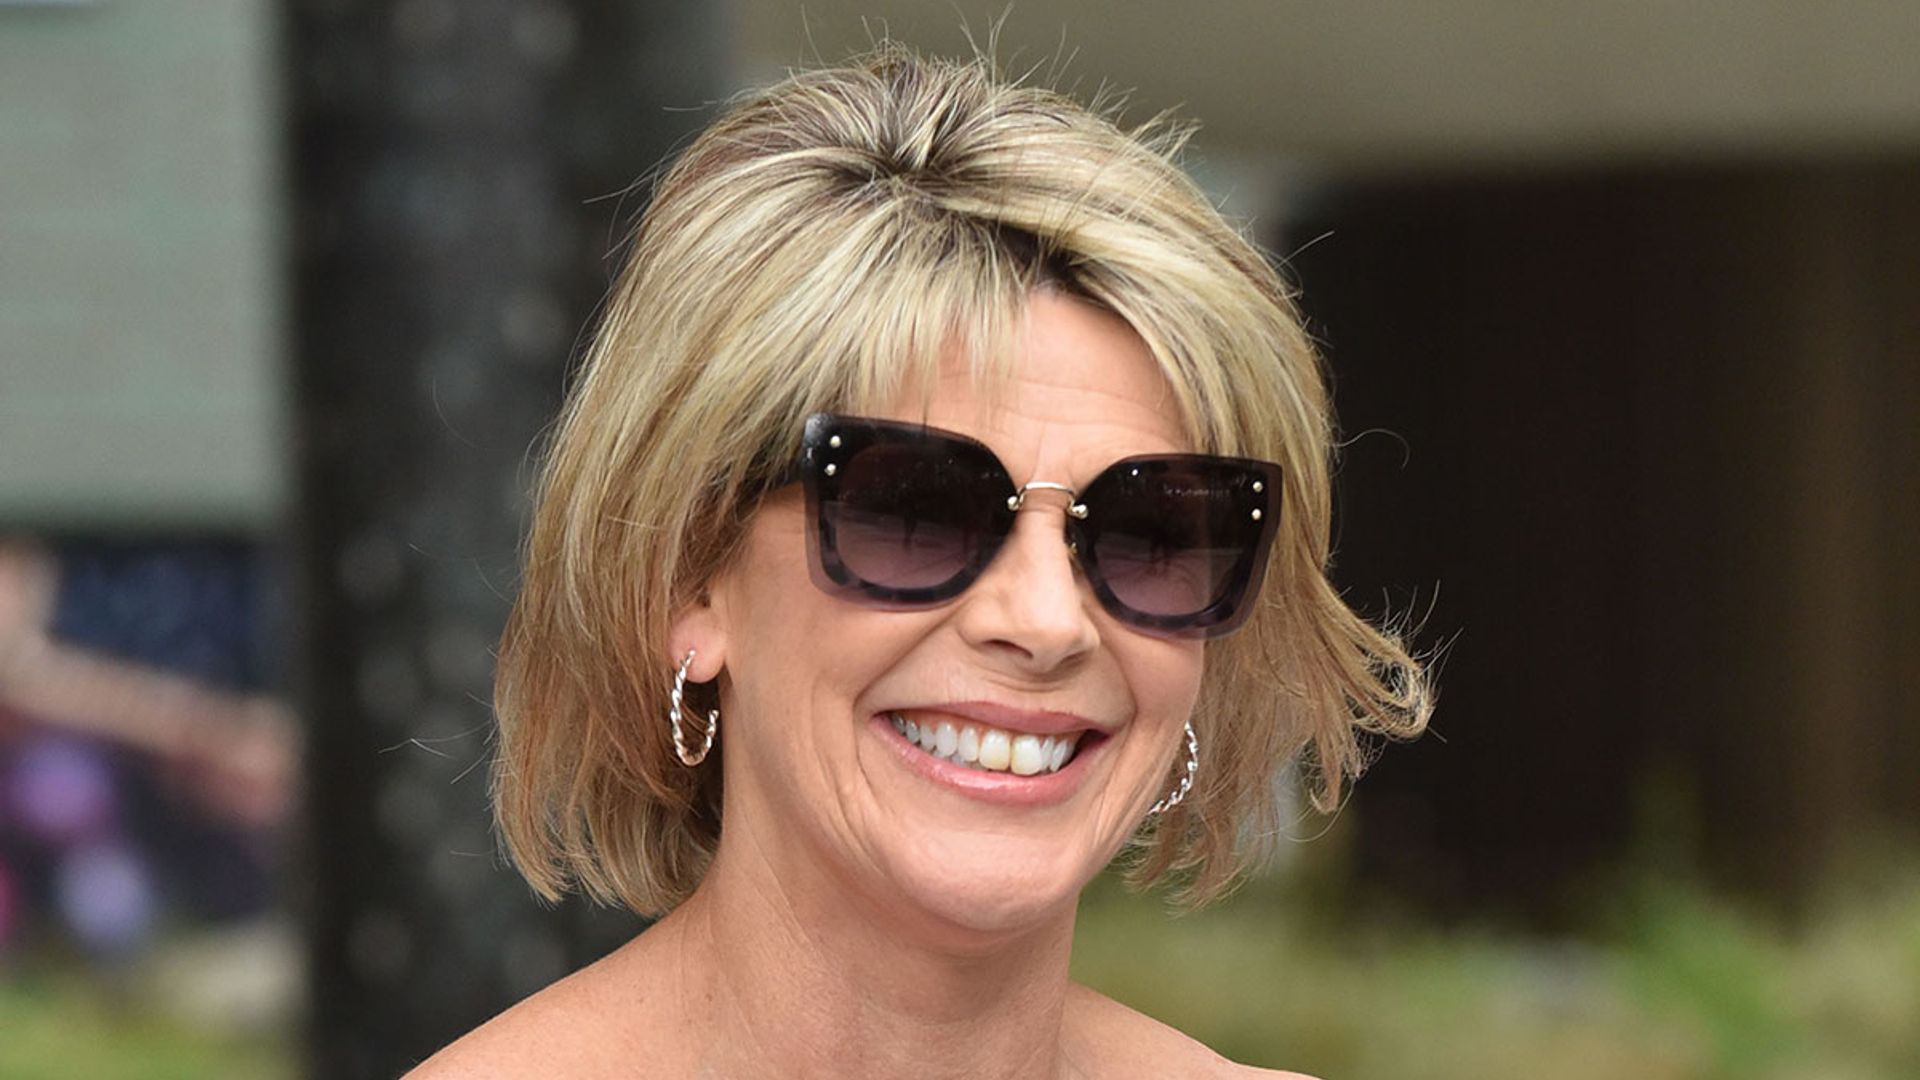 Ruth Langsford just wore an AMAZING £14 Marks & Spencer skirt